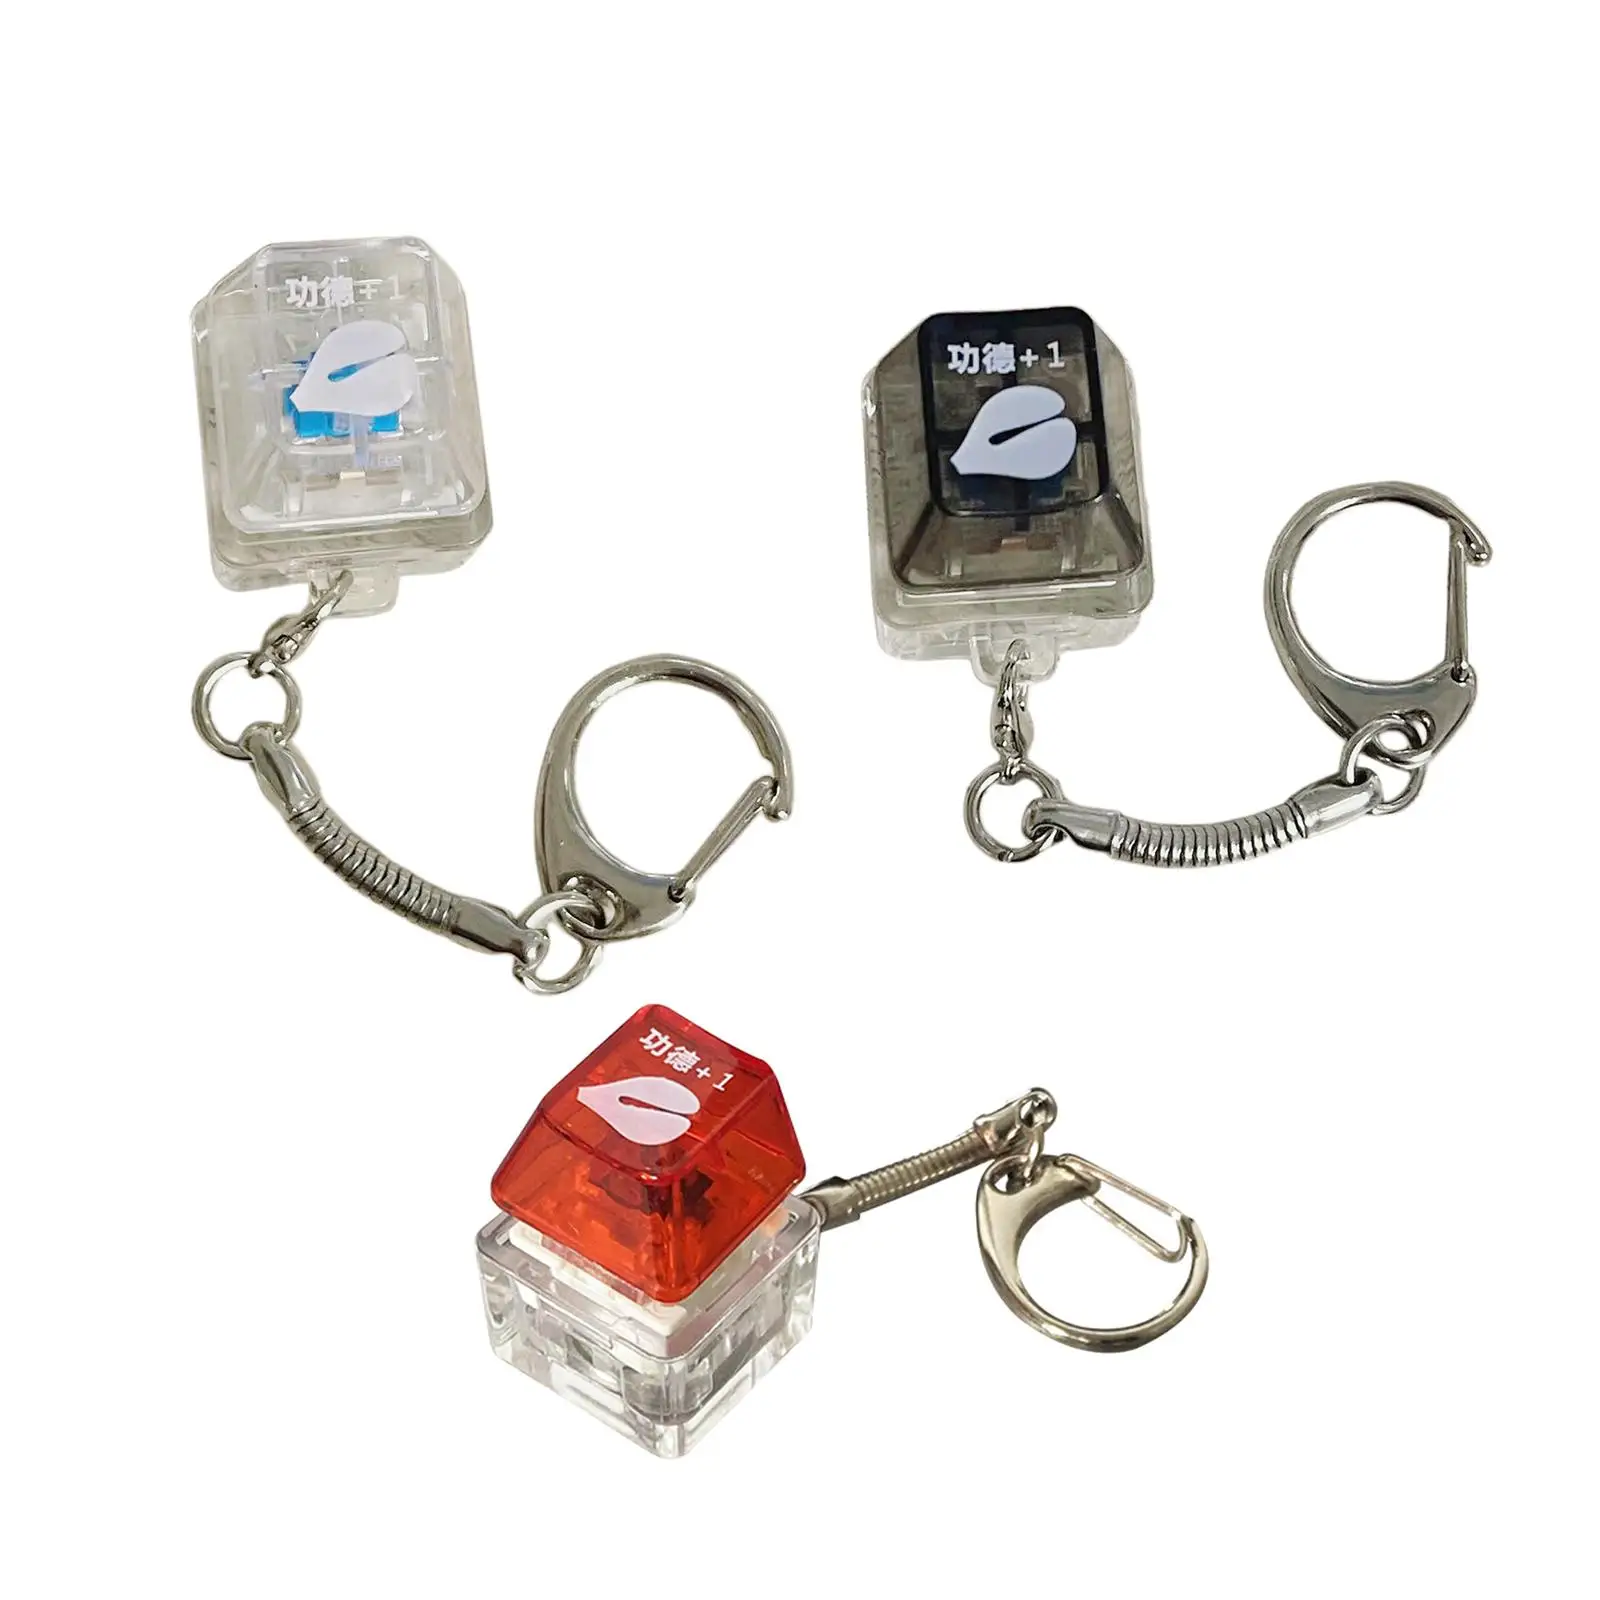 Keyboard Keychain Compact Size Light Button Gifts Pendant Backlight Key Caps Merit Accumulator Keychain Novelty Toys